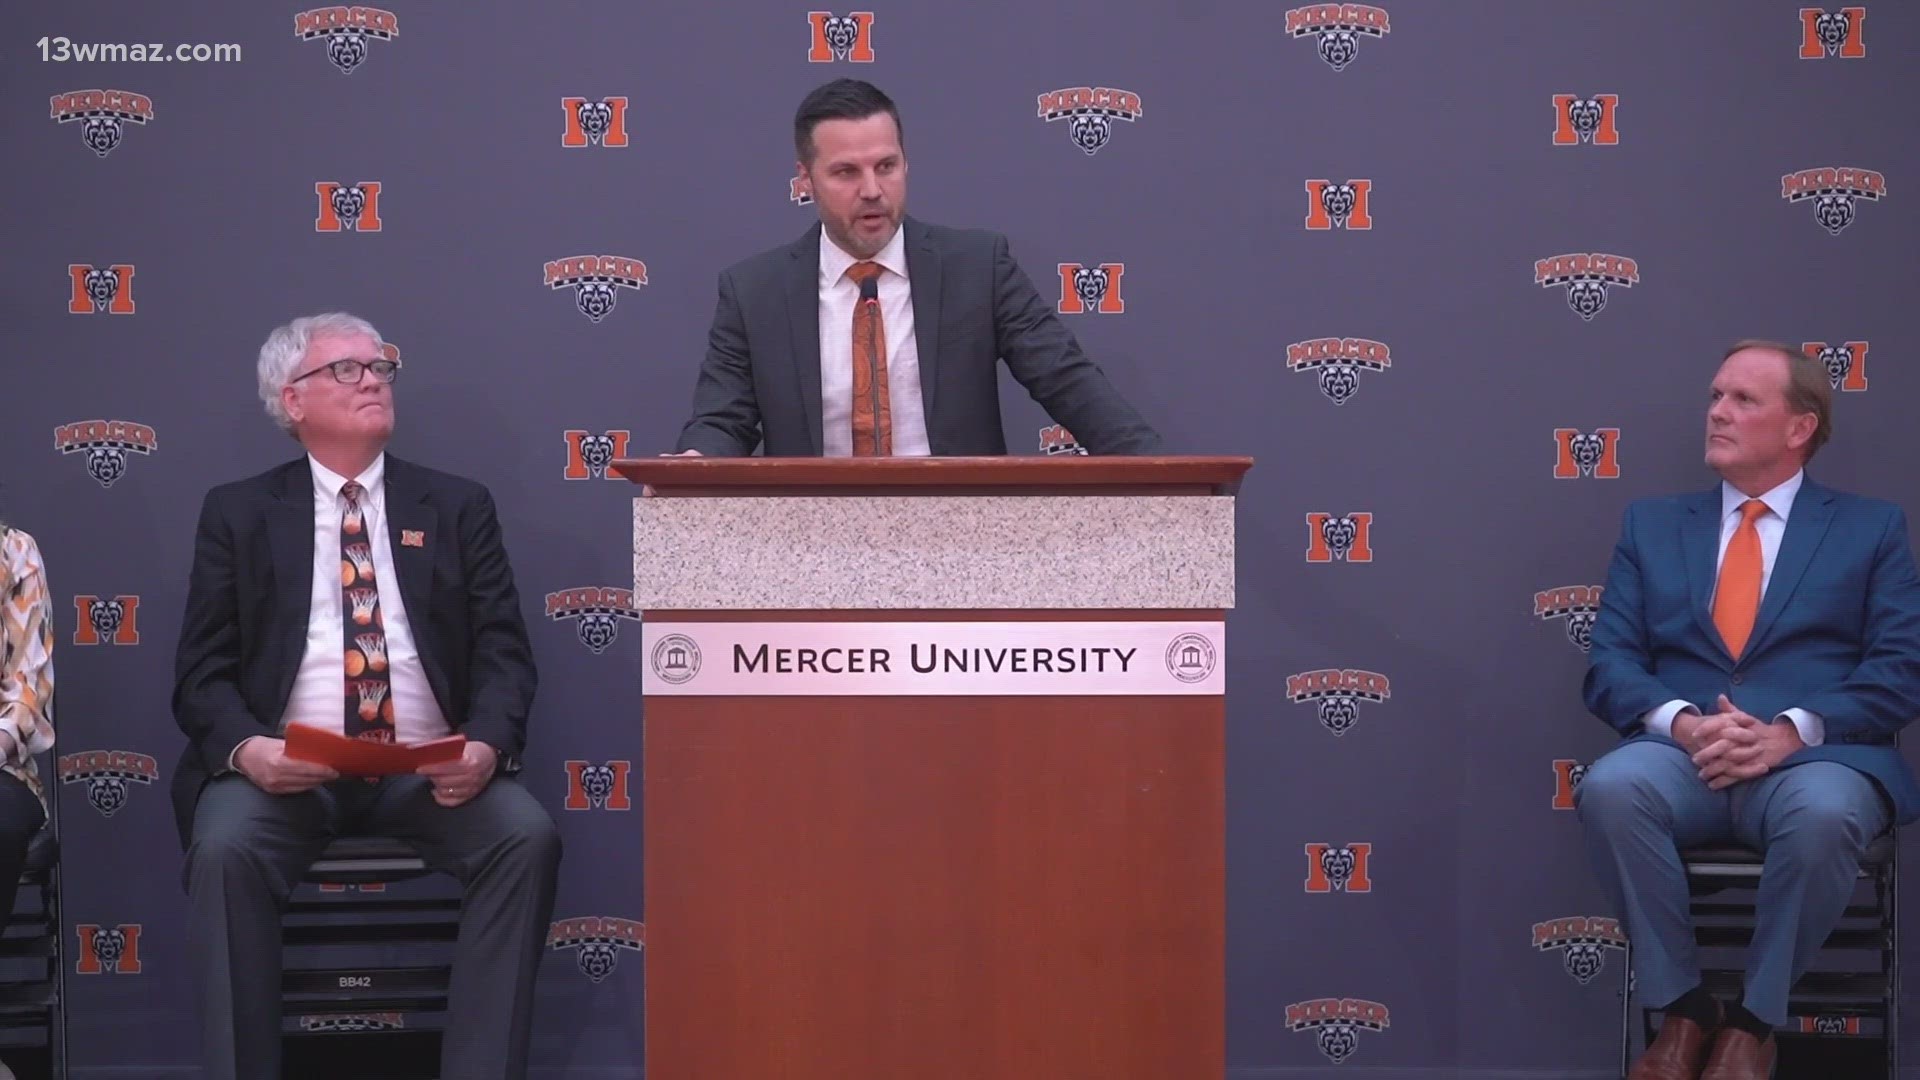 They introduced the new coach before the media and the community Friday night.